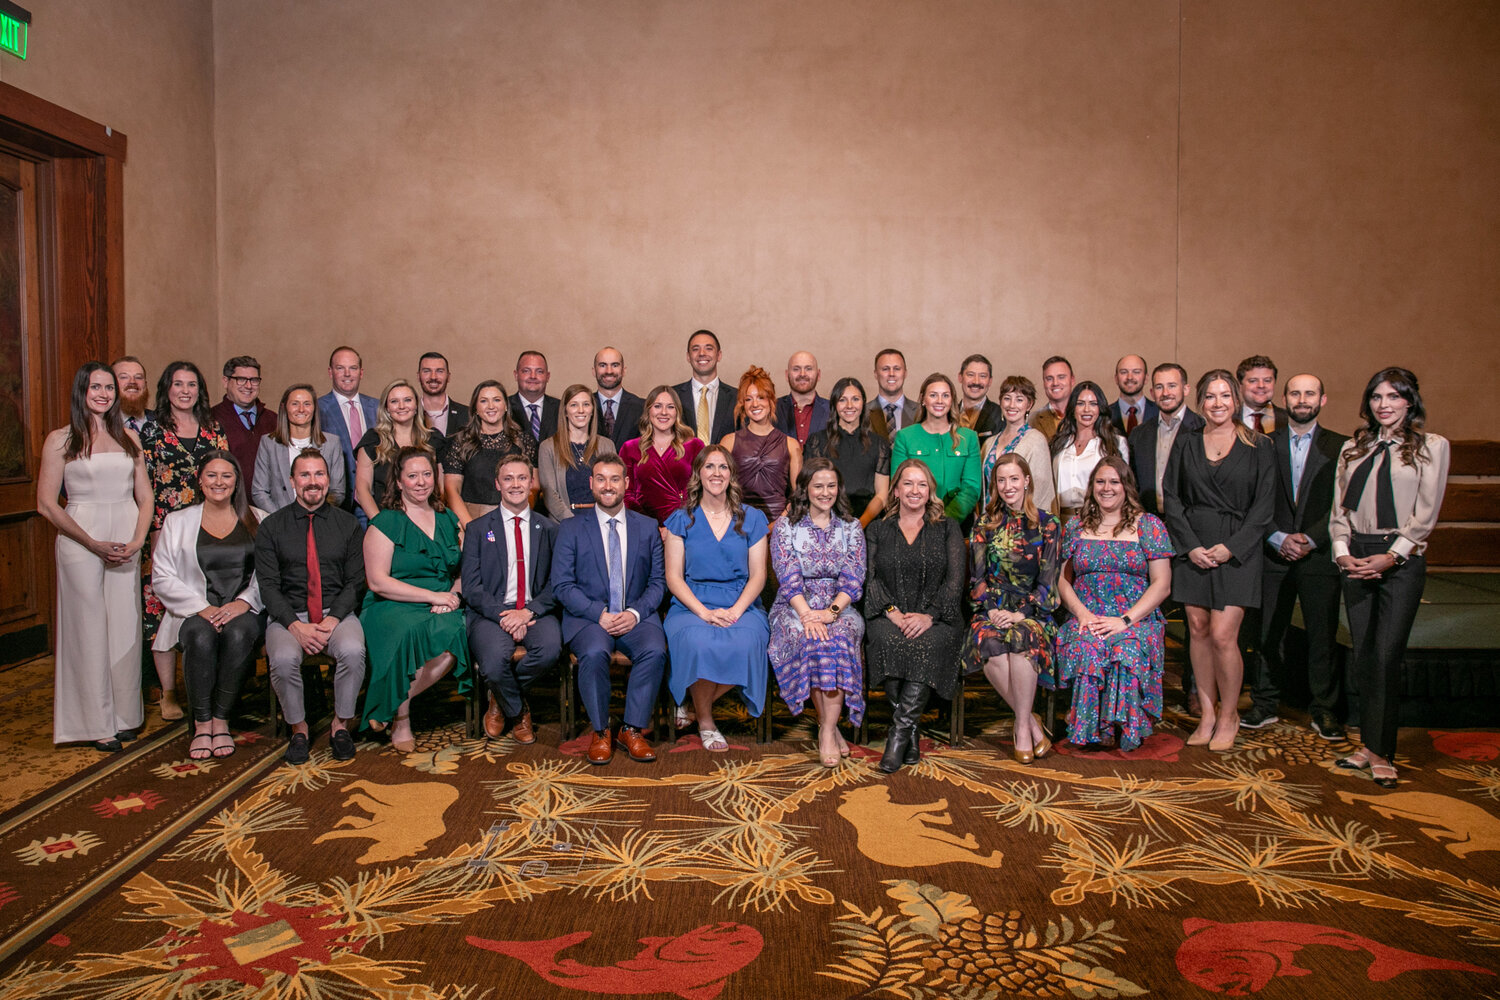 The event honored 40 young professionals.